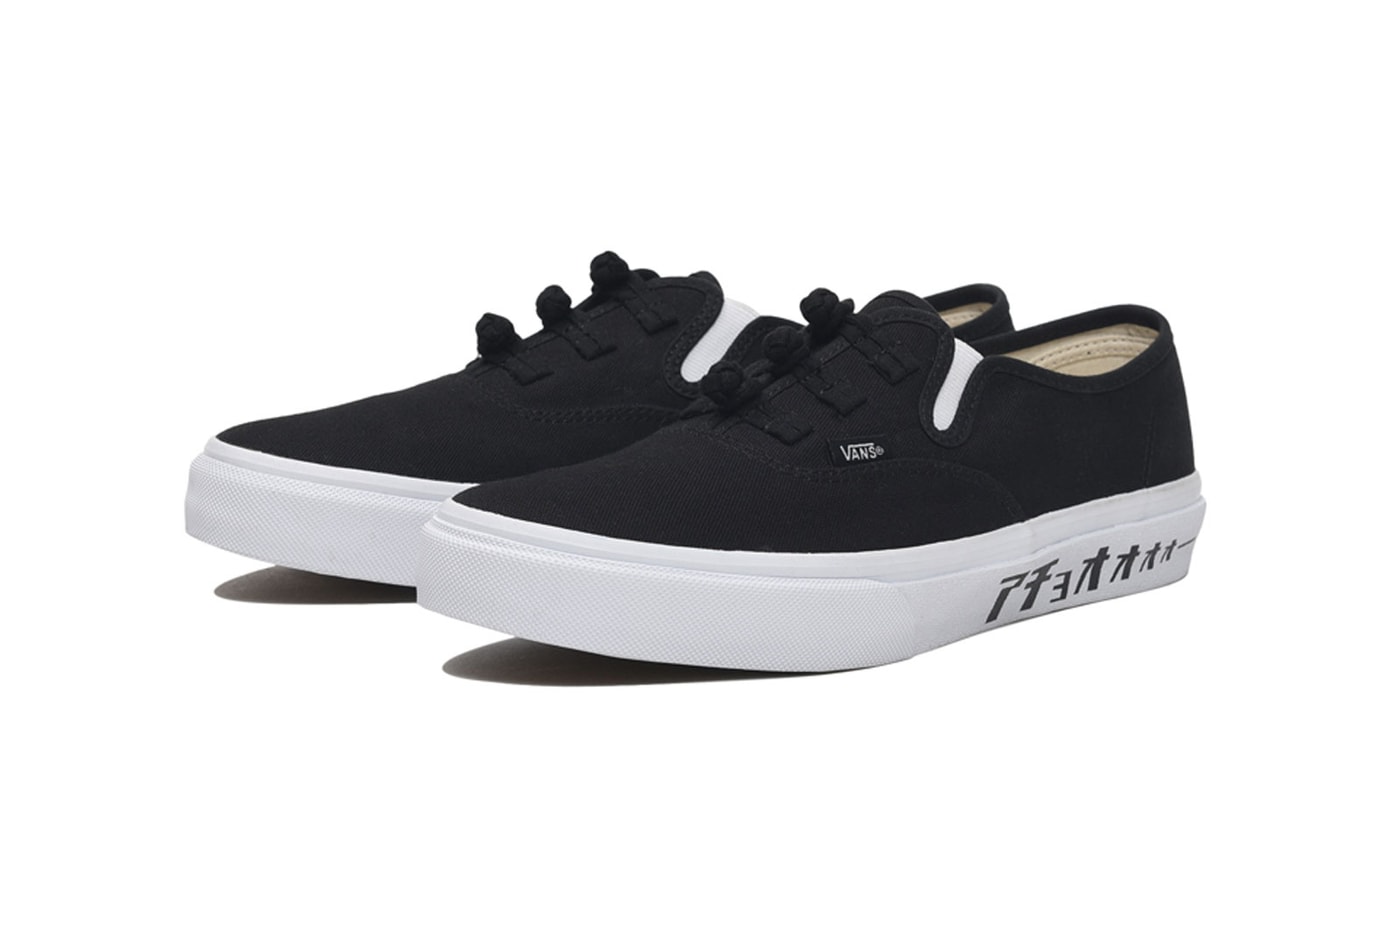 BILLYs Vans Authentic Kung Fu Pack Black White Navy Gum Frog Button Laces Nagoya exclusive kiai midsole slip on Release